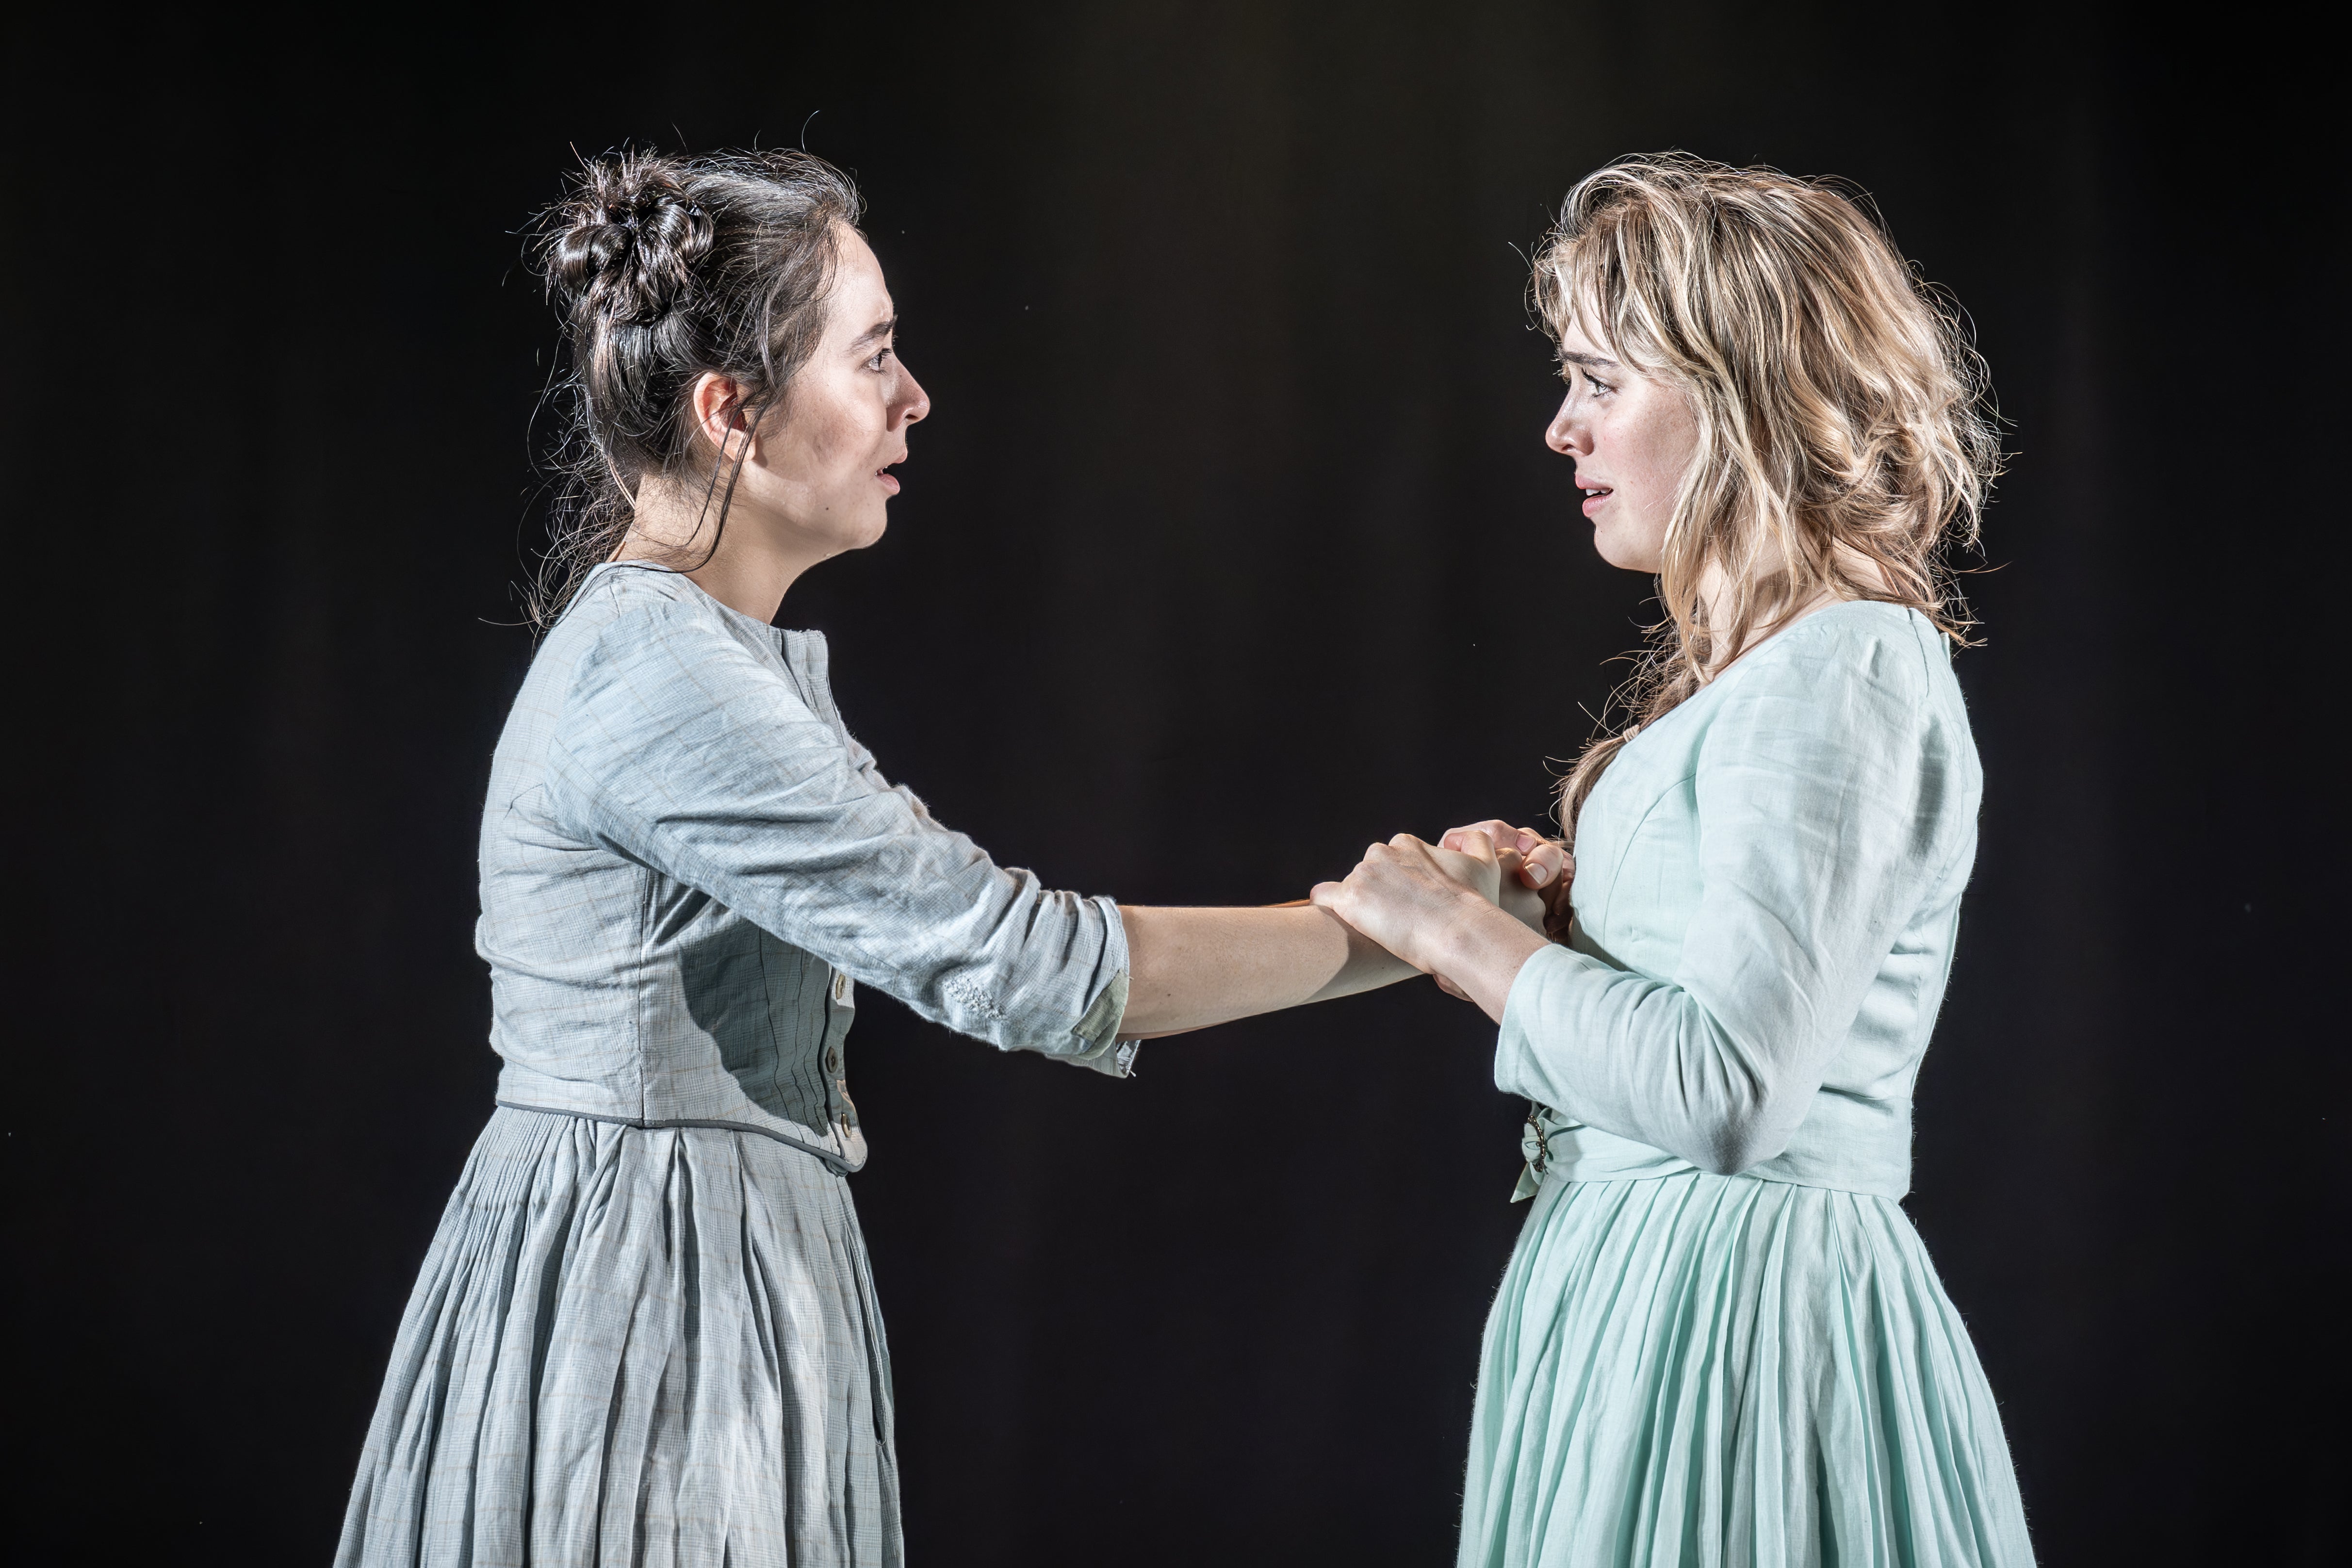 Ami Tredrea (Lizzie Hexam) and Bella Maclean (Bella Wilfer) in ‘London Tide’ at the National Theatre